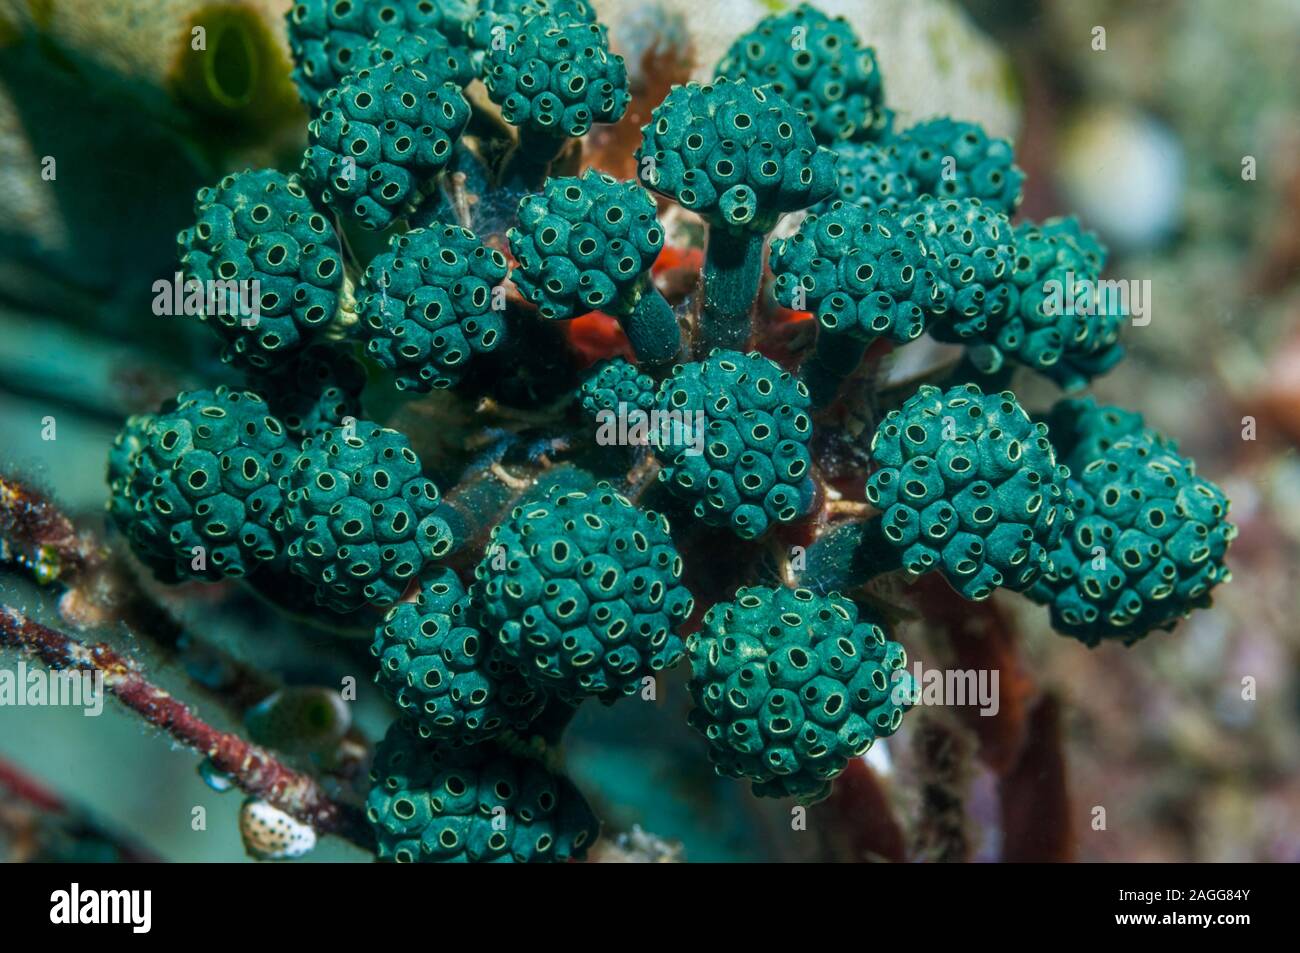 Stalked Sea squirts - Oxycorynia fascicularis.  West Papua, Indonesia. Stock Photo